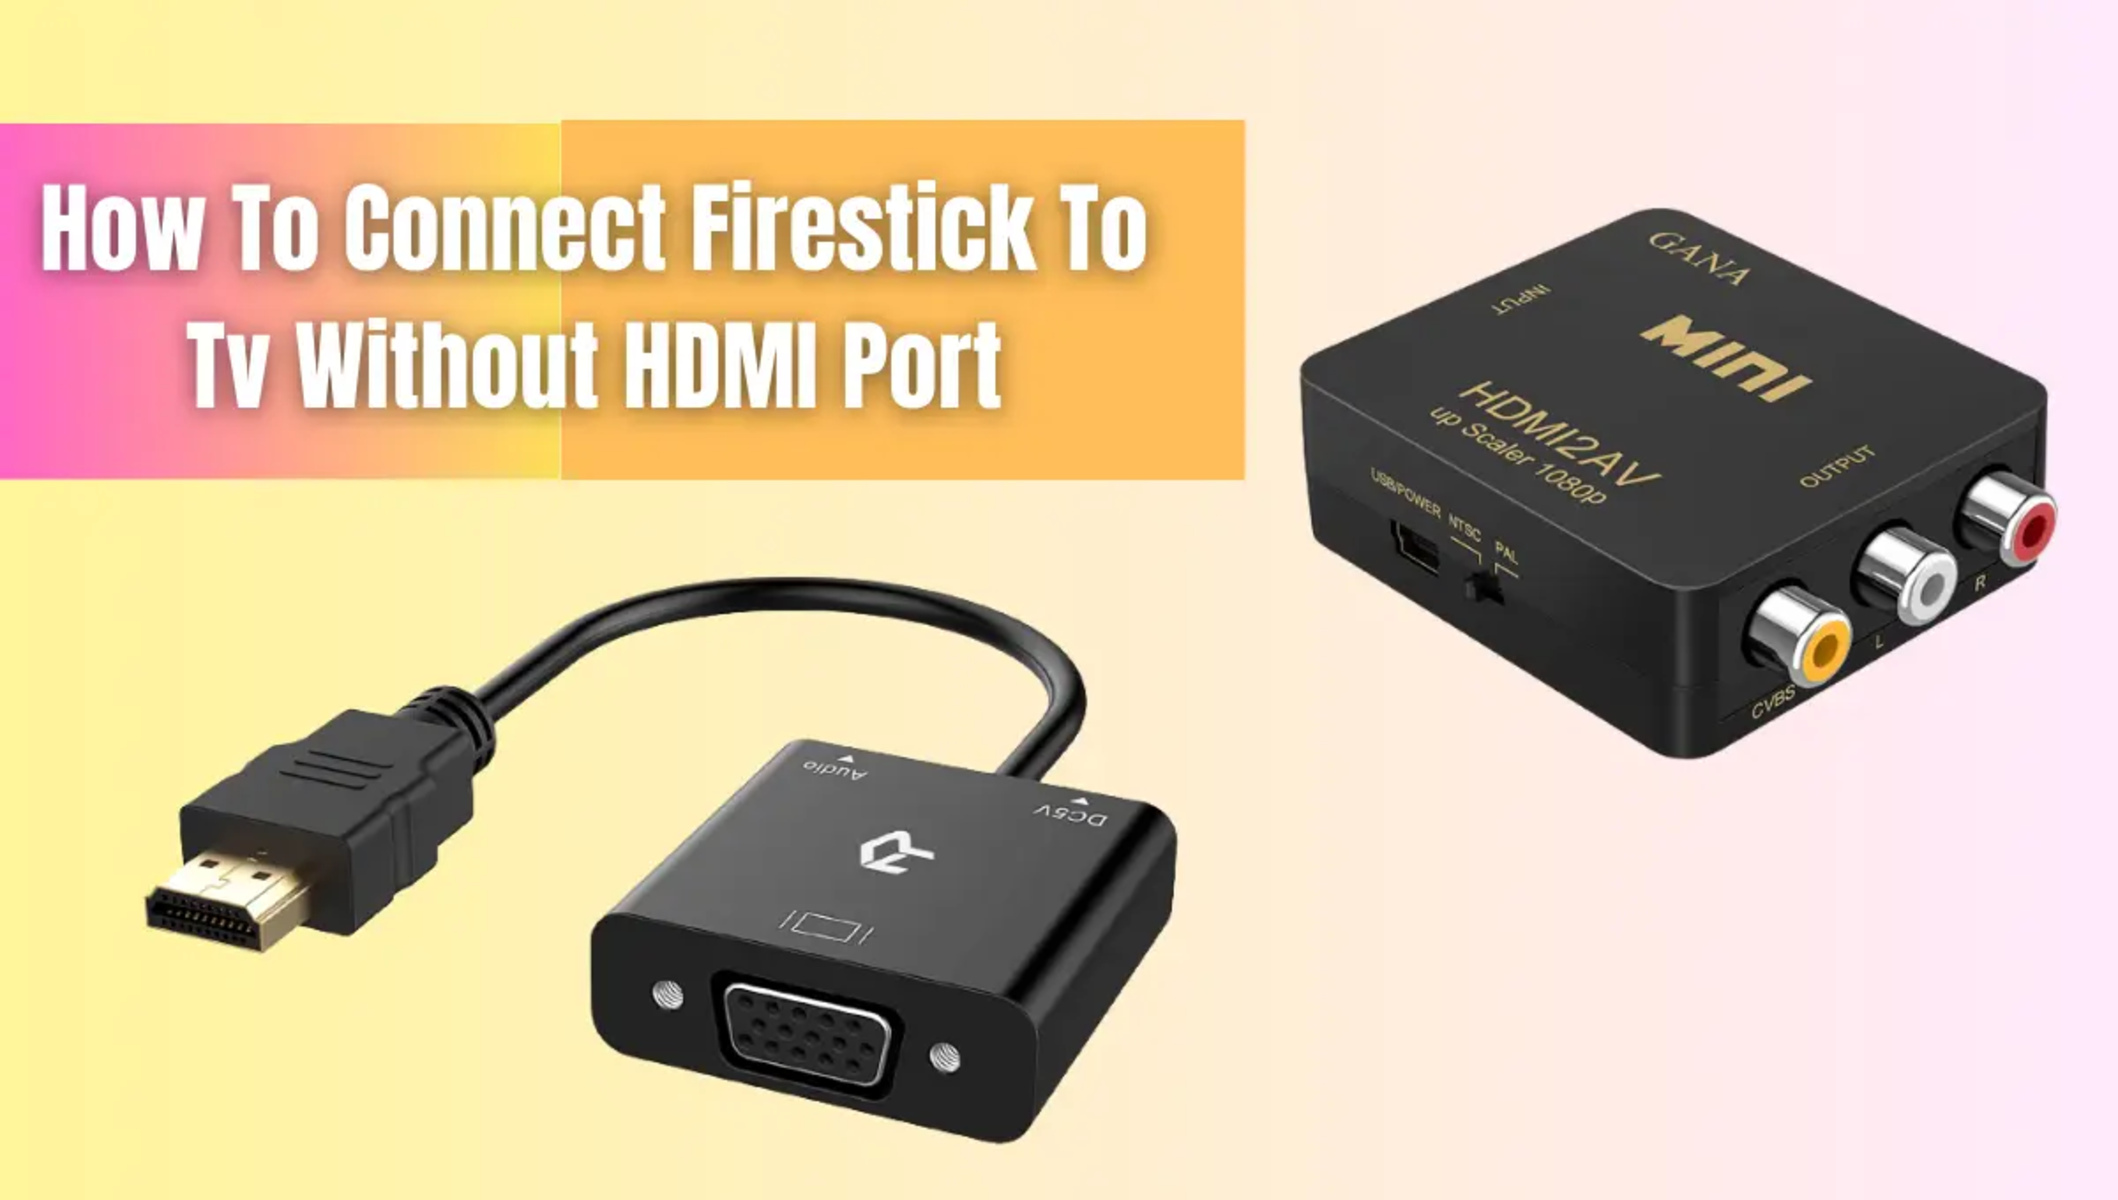 How To Connect Amazon Fire Stick To Tv Without HDMI